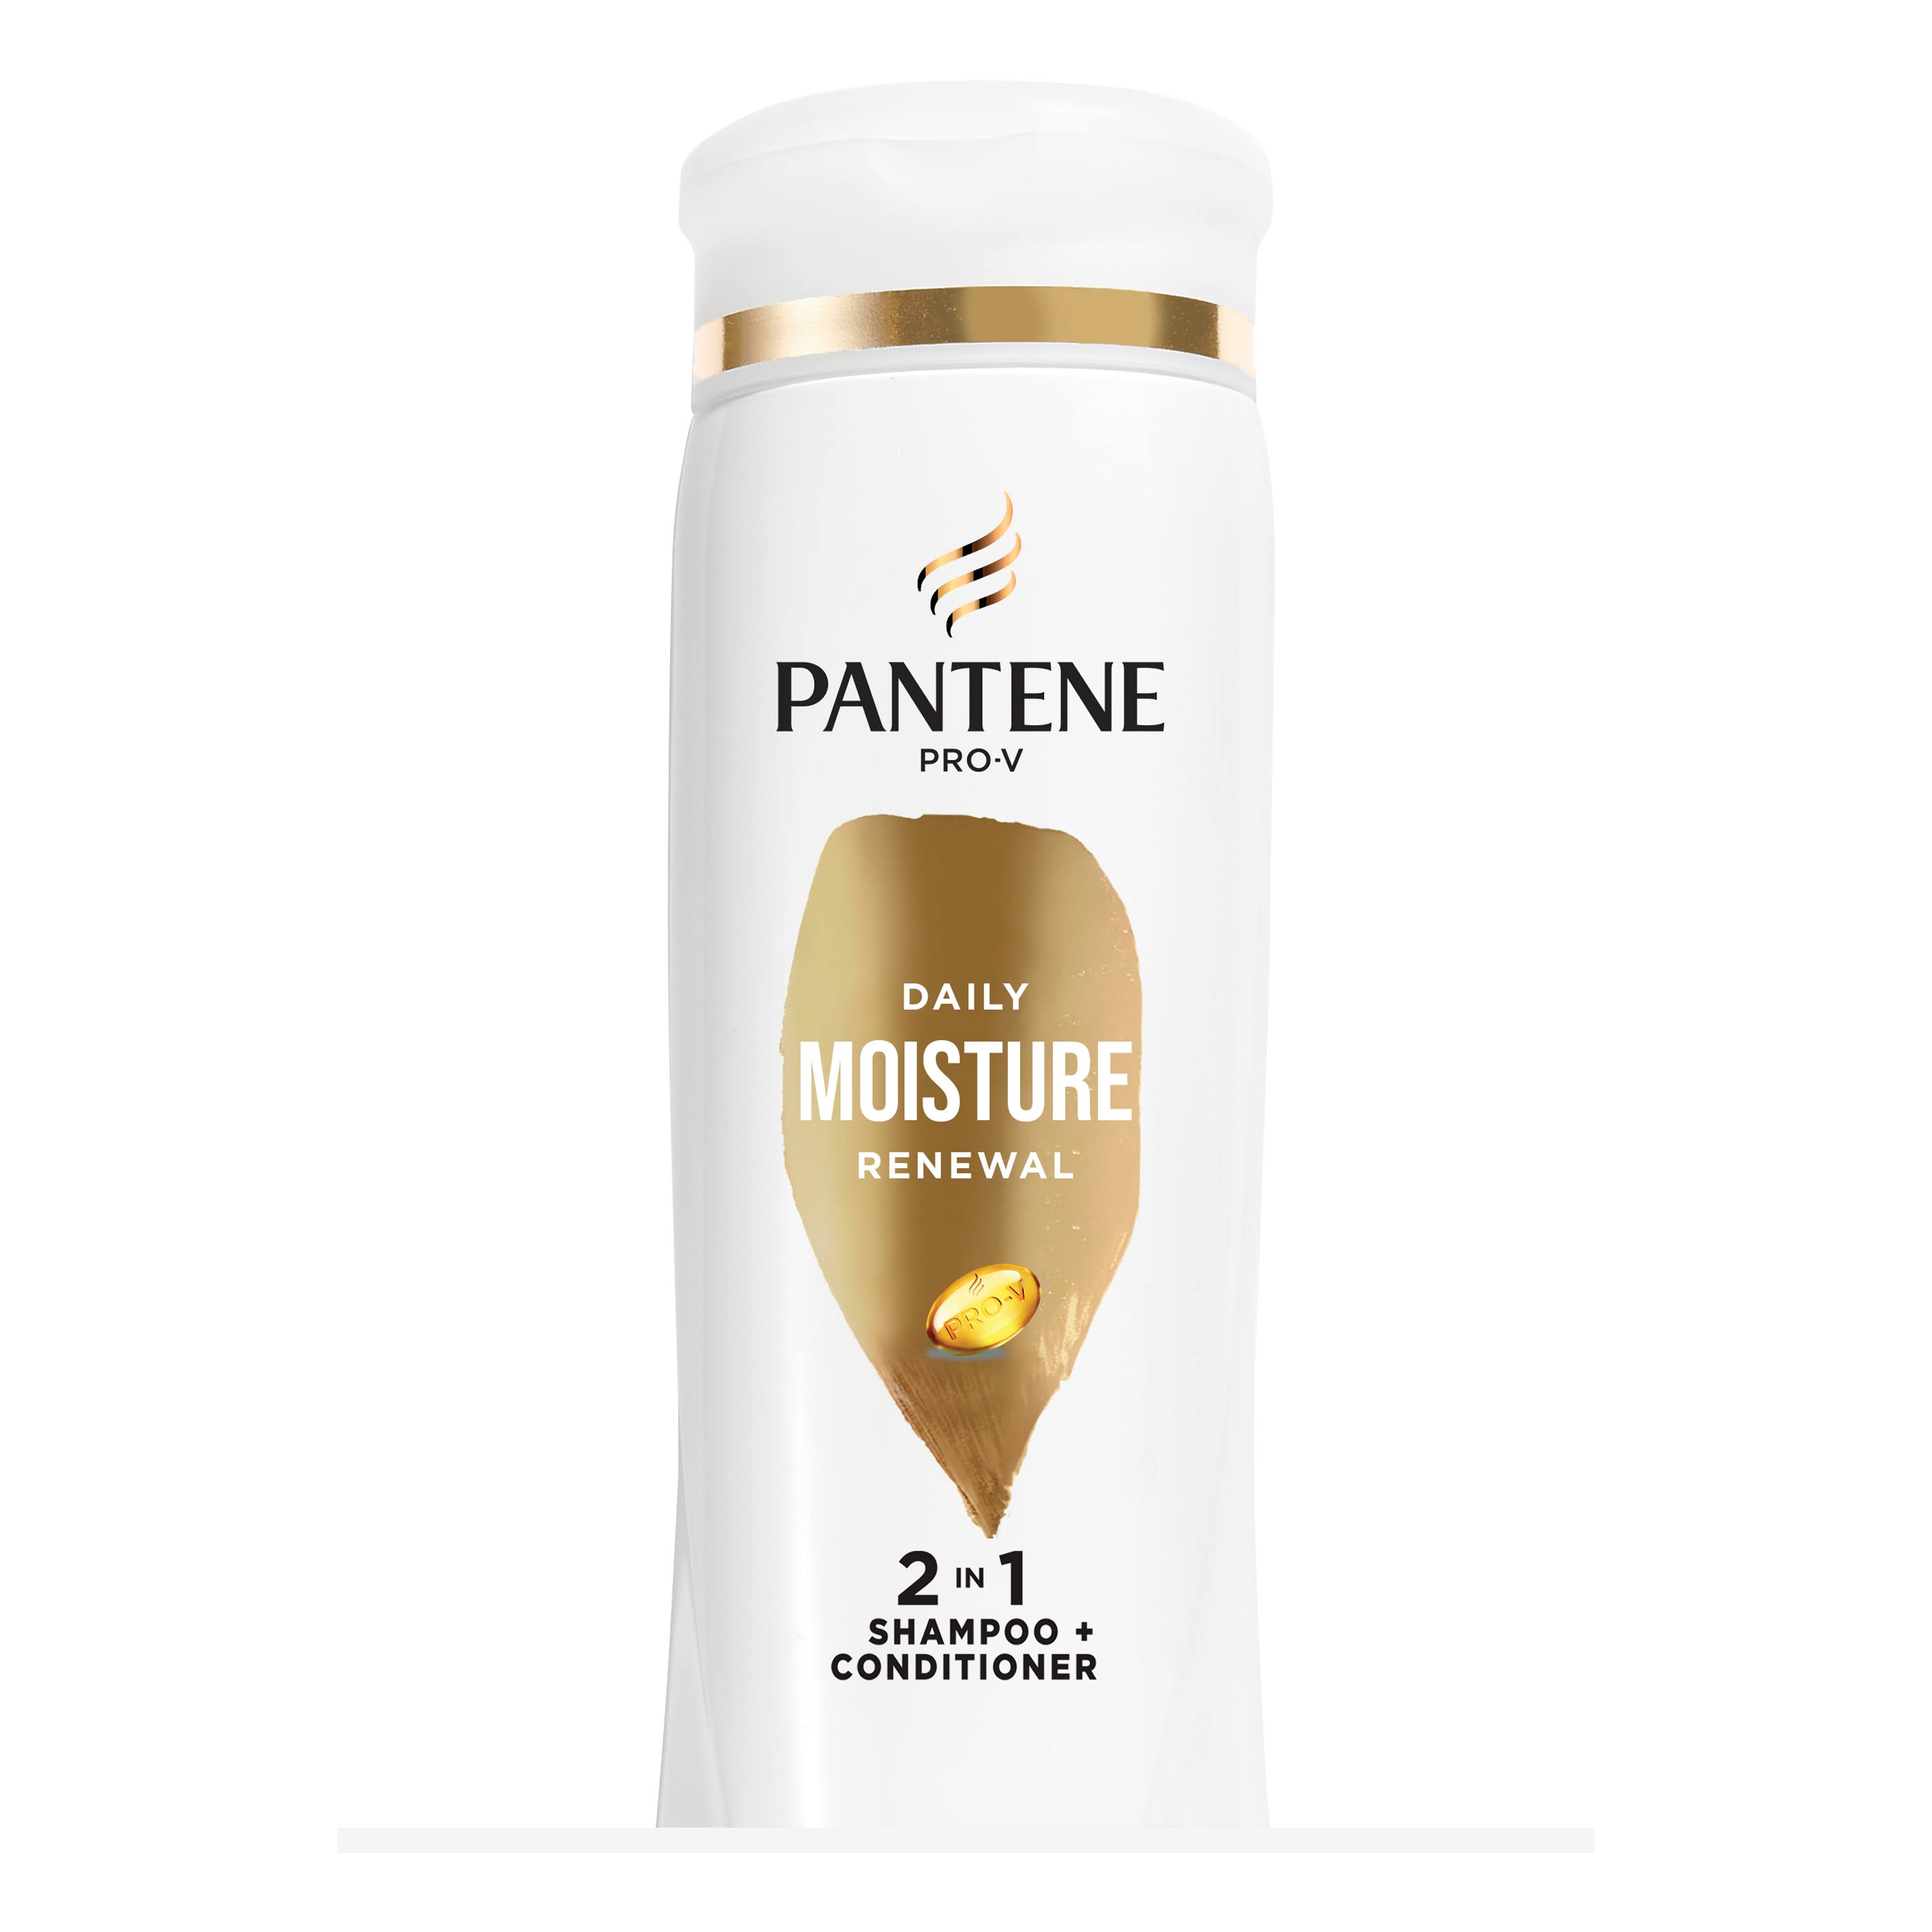 Pantene Daily Moisture Renewal 2 in 1 Shampoo + Conditioner